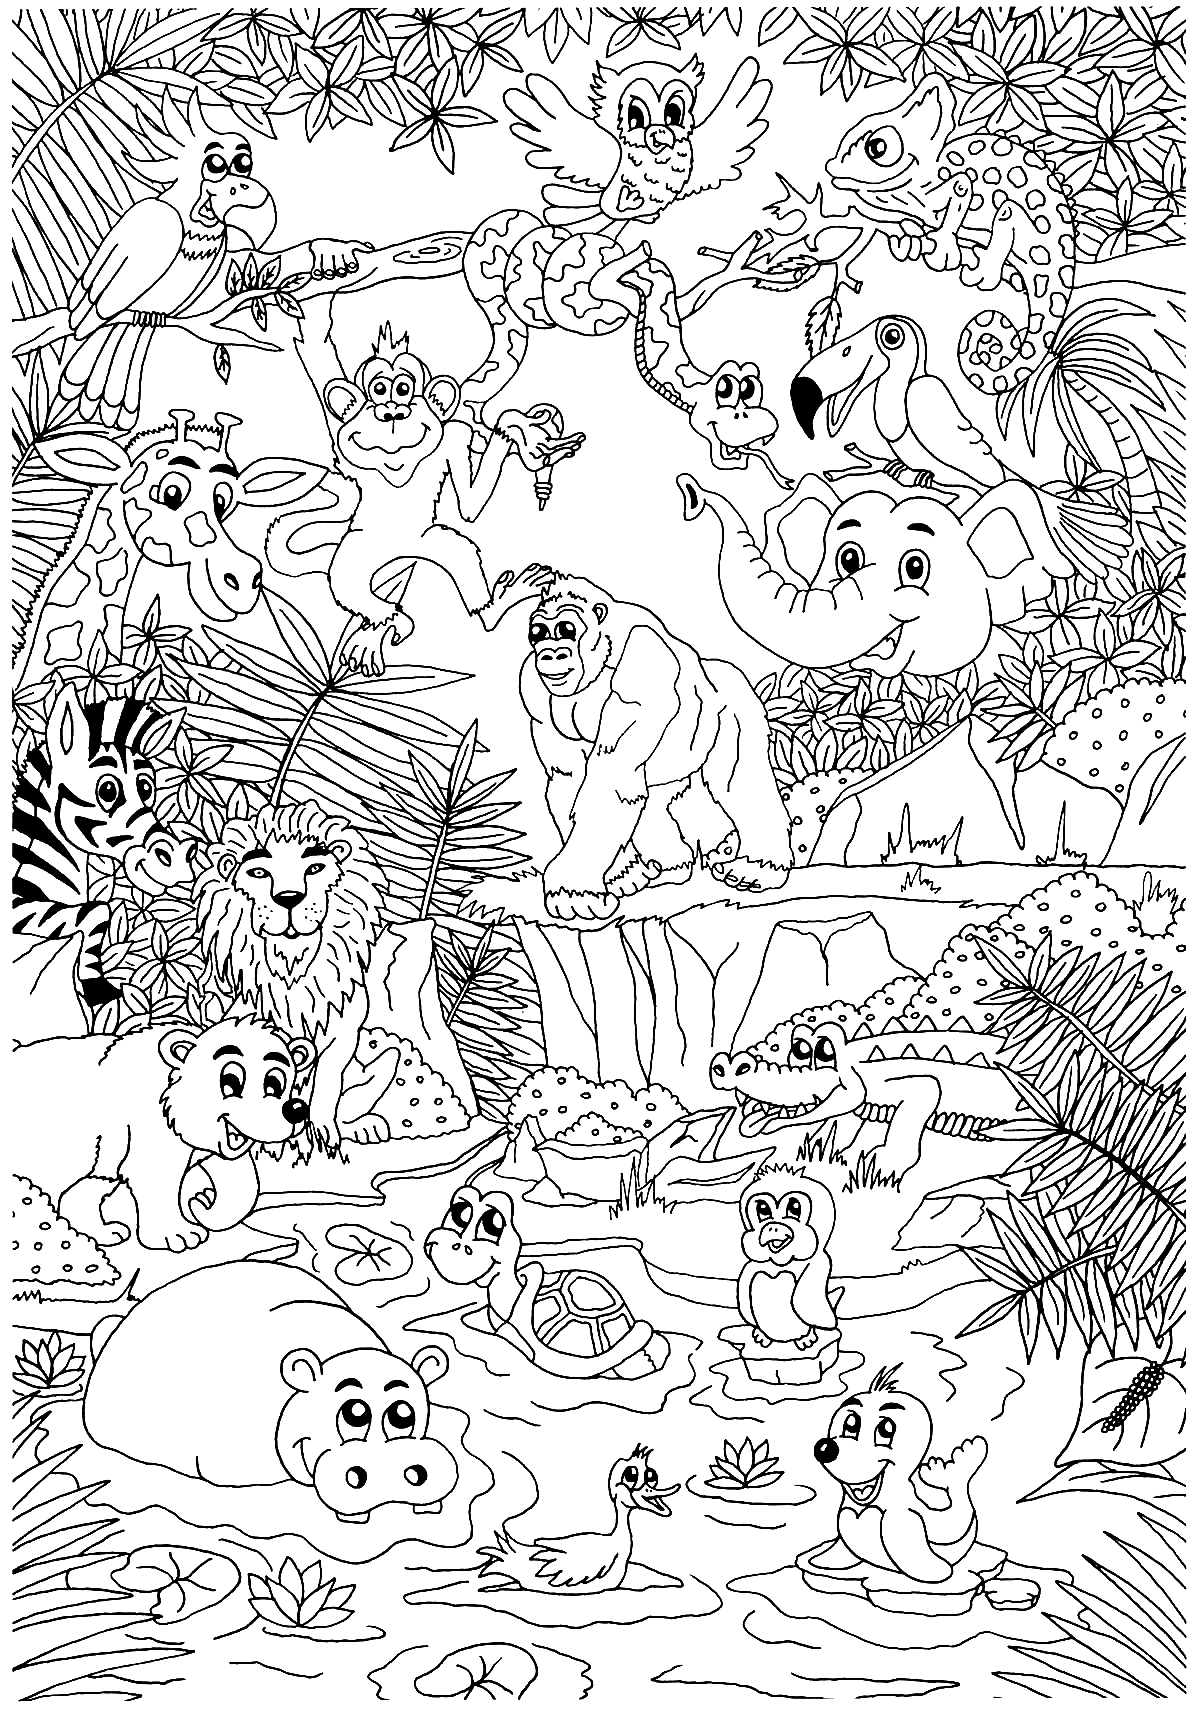 Many Jungle Animals Coloring Page